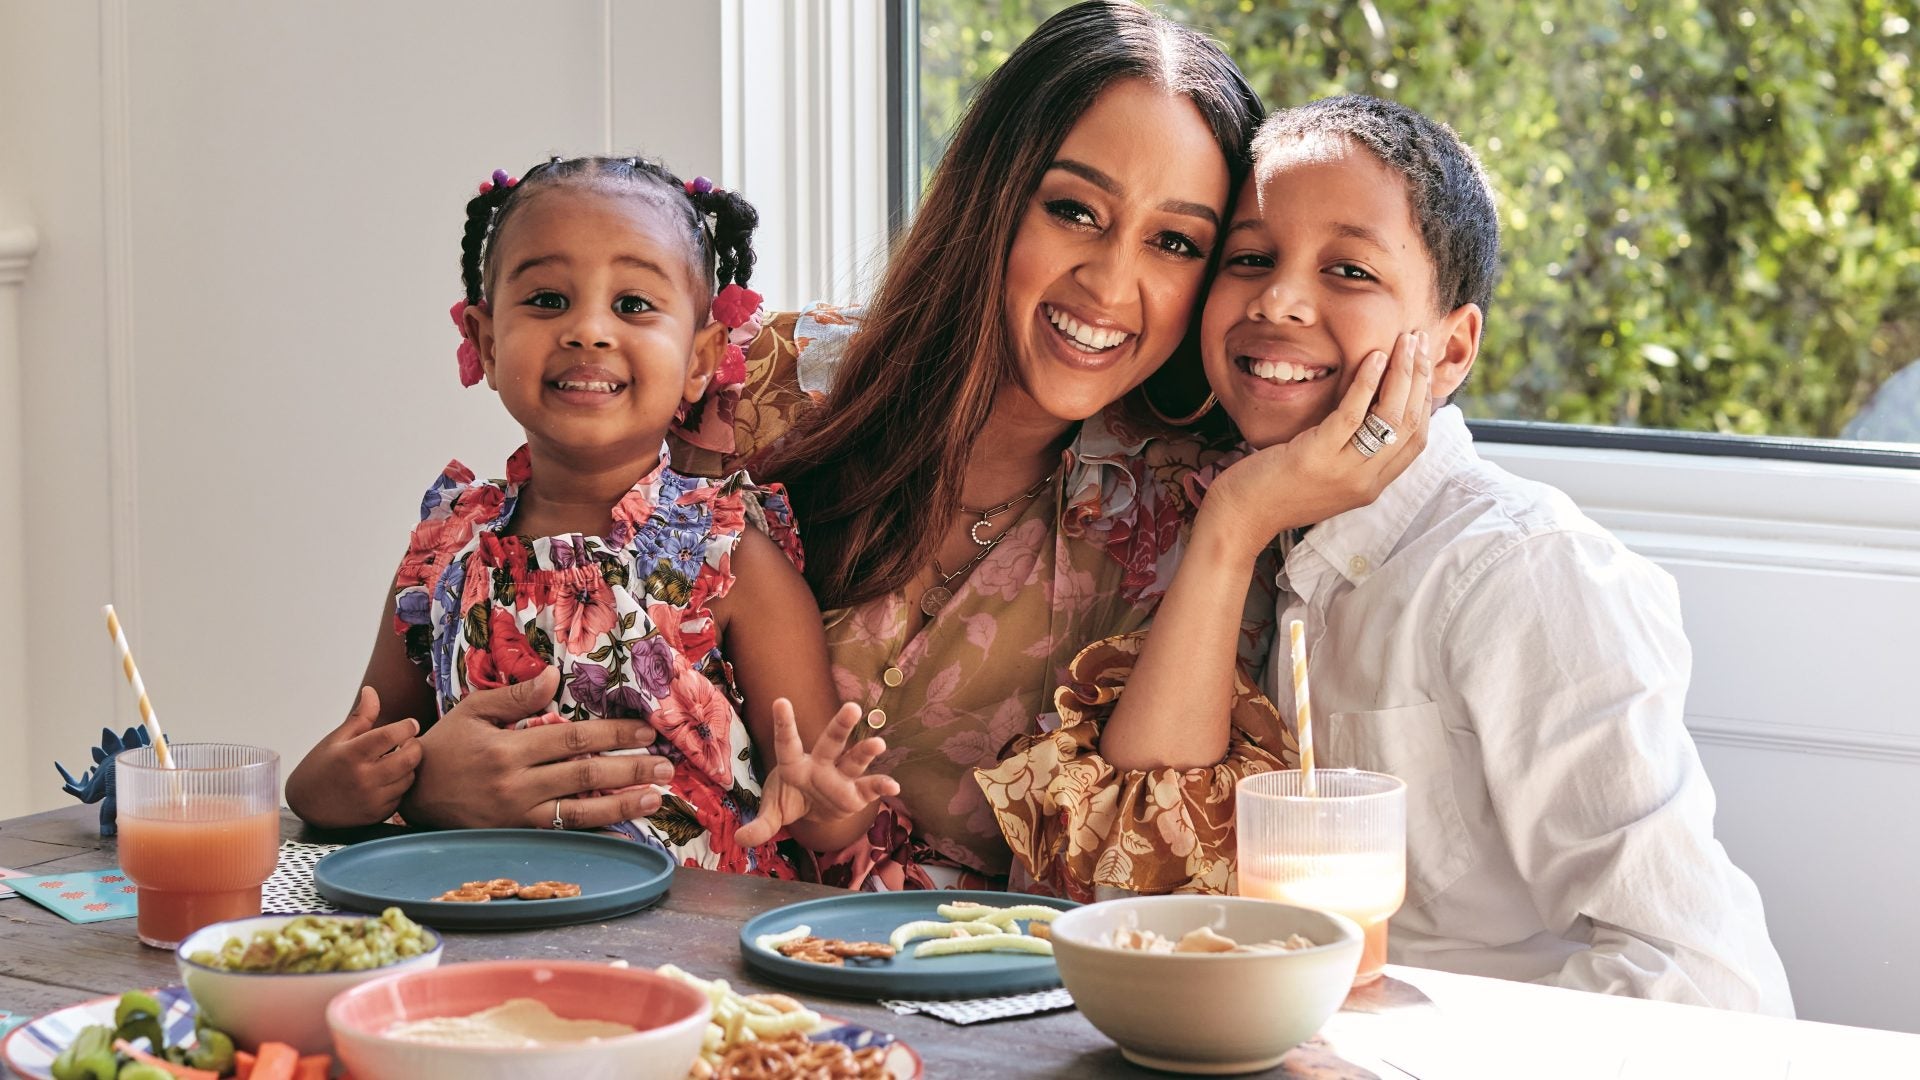 Tia Mowry On Having A Community Of Busy Moms to Lean On and How She's Learning To Do More With Less